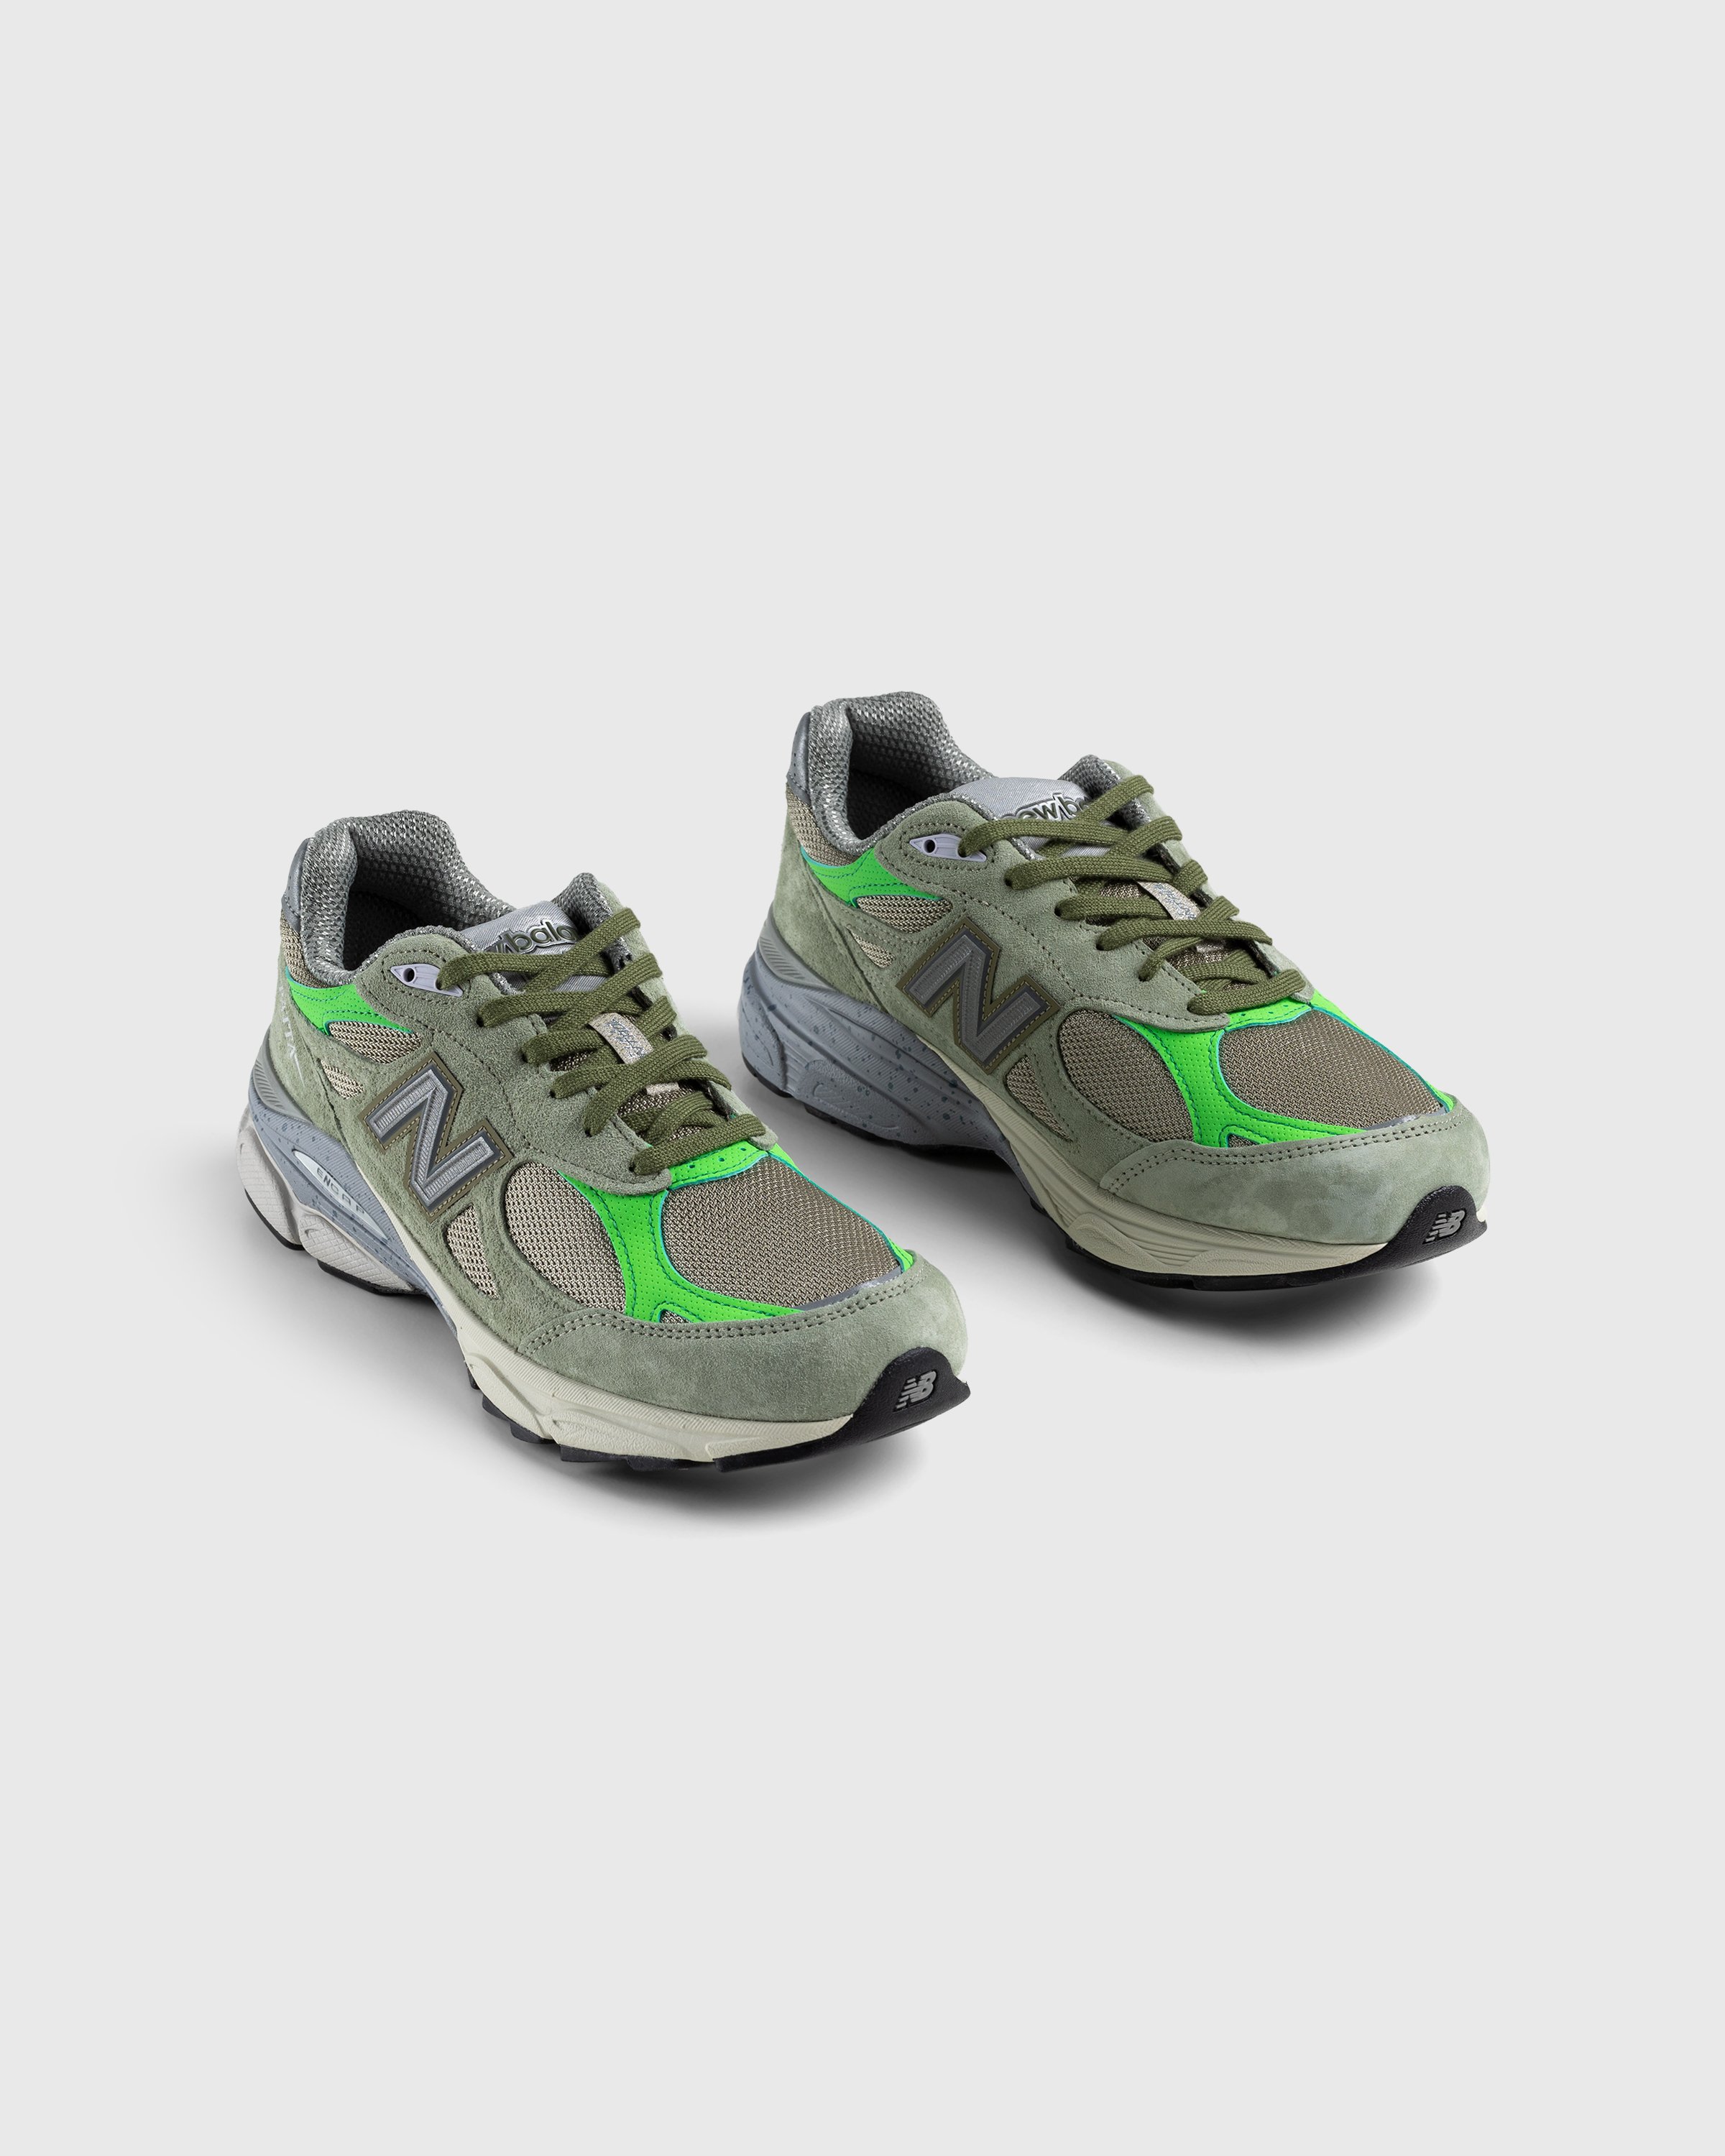 Patta x New Balance - M990PP3 Made in USA 990v3 Olive/White Pepper - Footwear - Green - Image 4